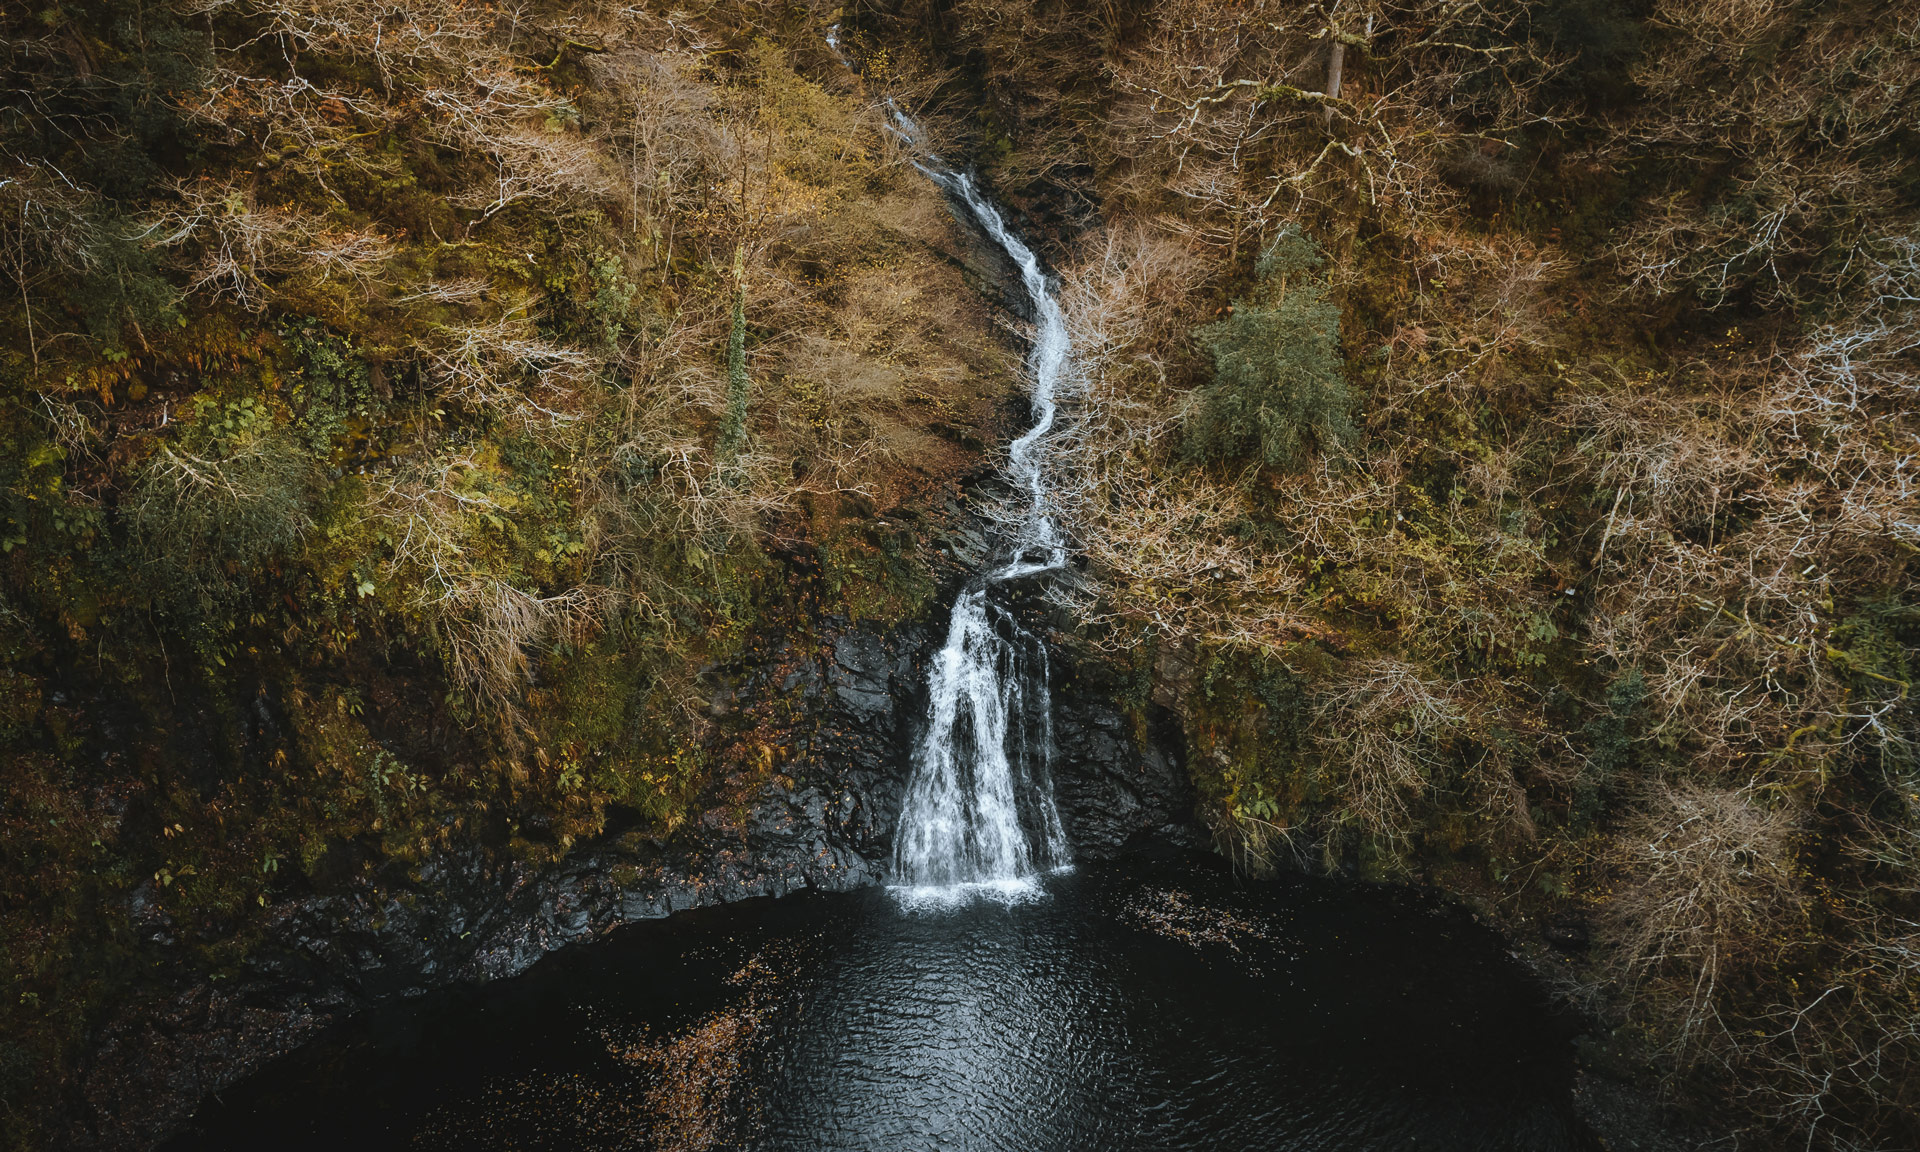 Drone photo of waterfall at Felenrhyd and Llennyrch woods on an autumn day.